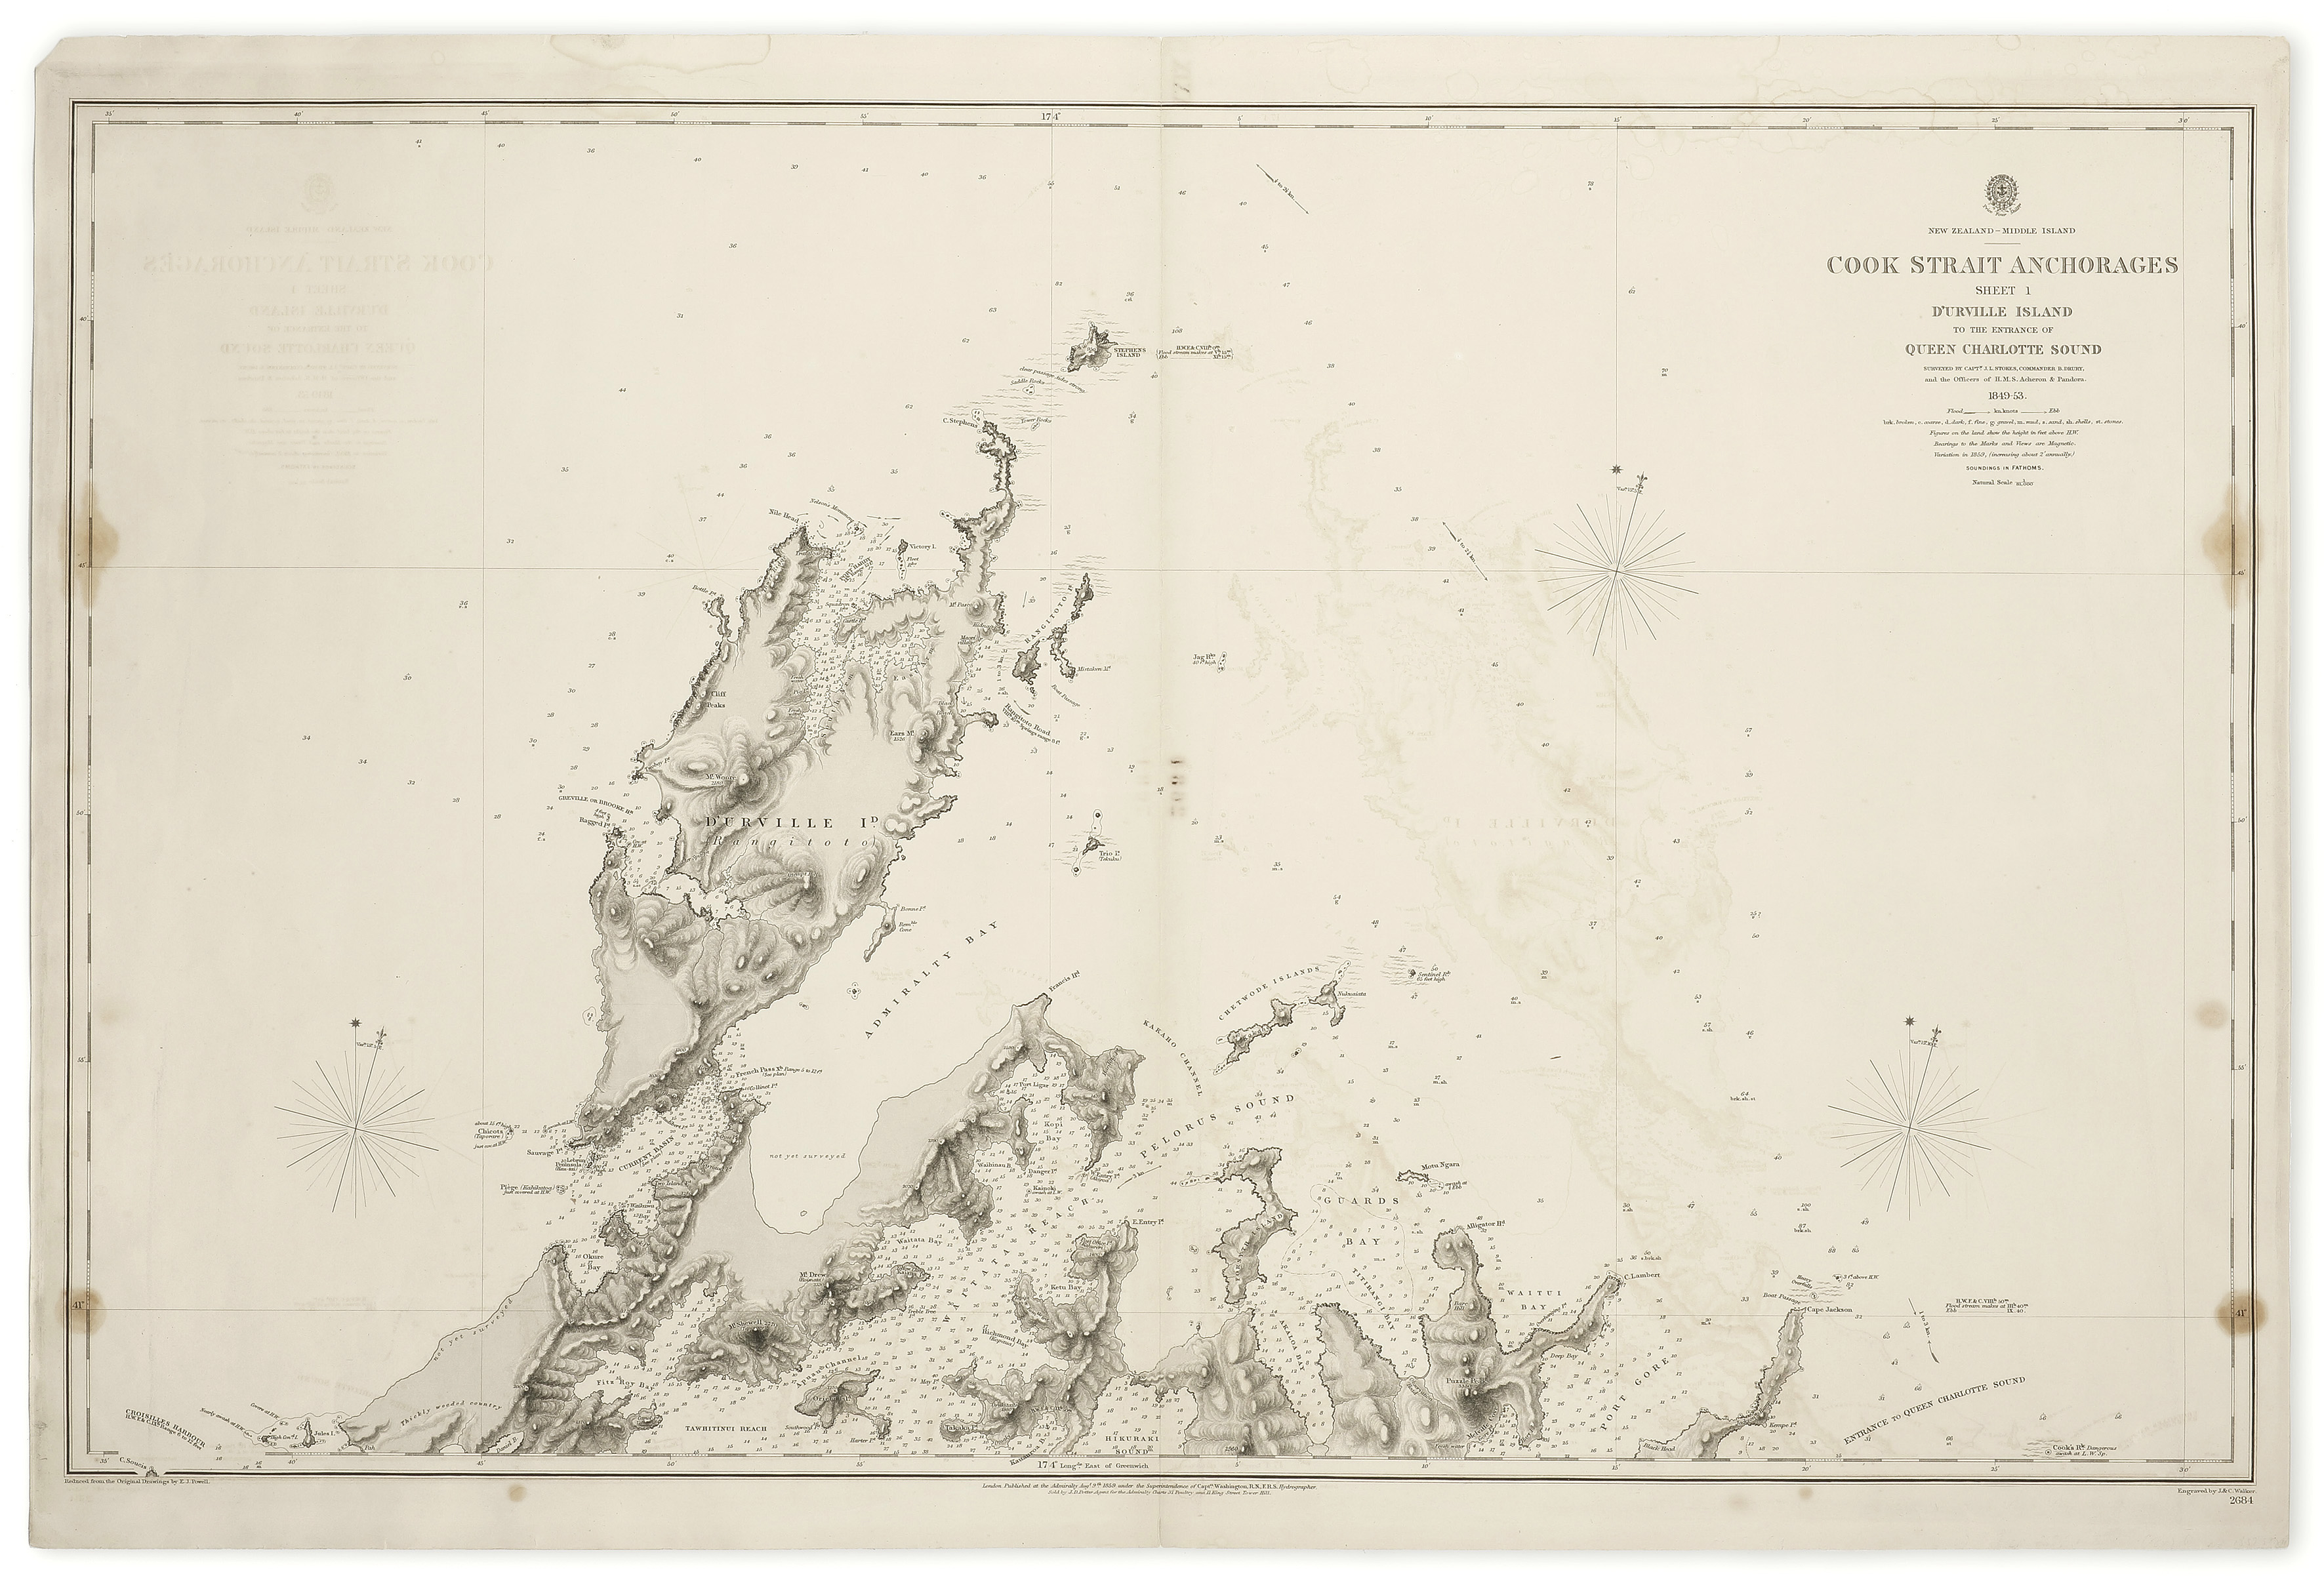 [NEW ZEALAND] Cook Strait Anchorages. Sheet 1. Durville Island - Antique Map from 1859